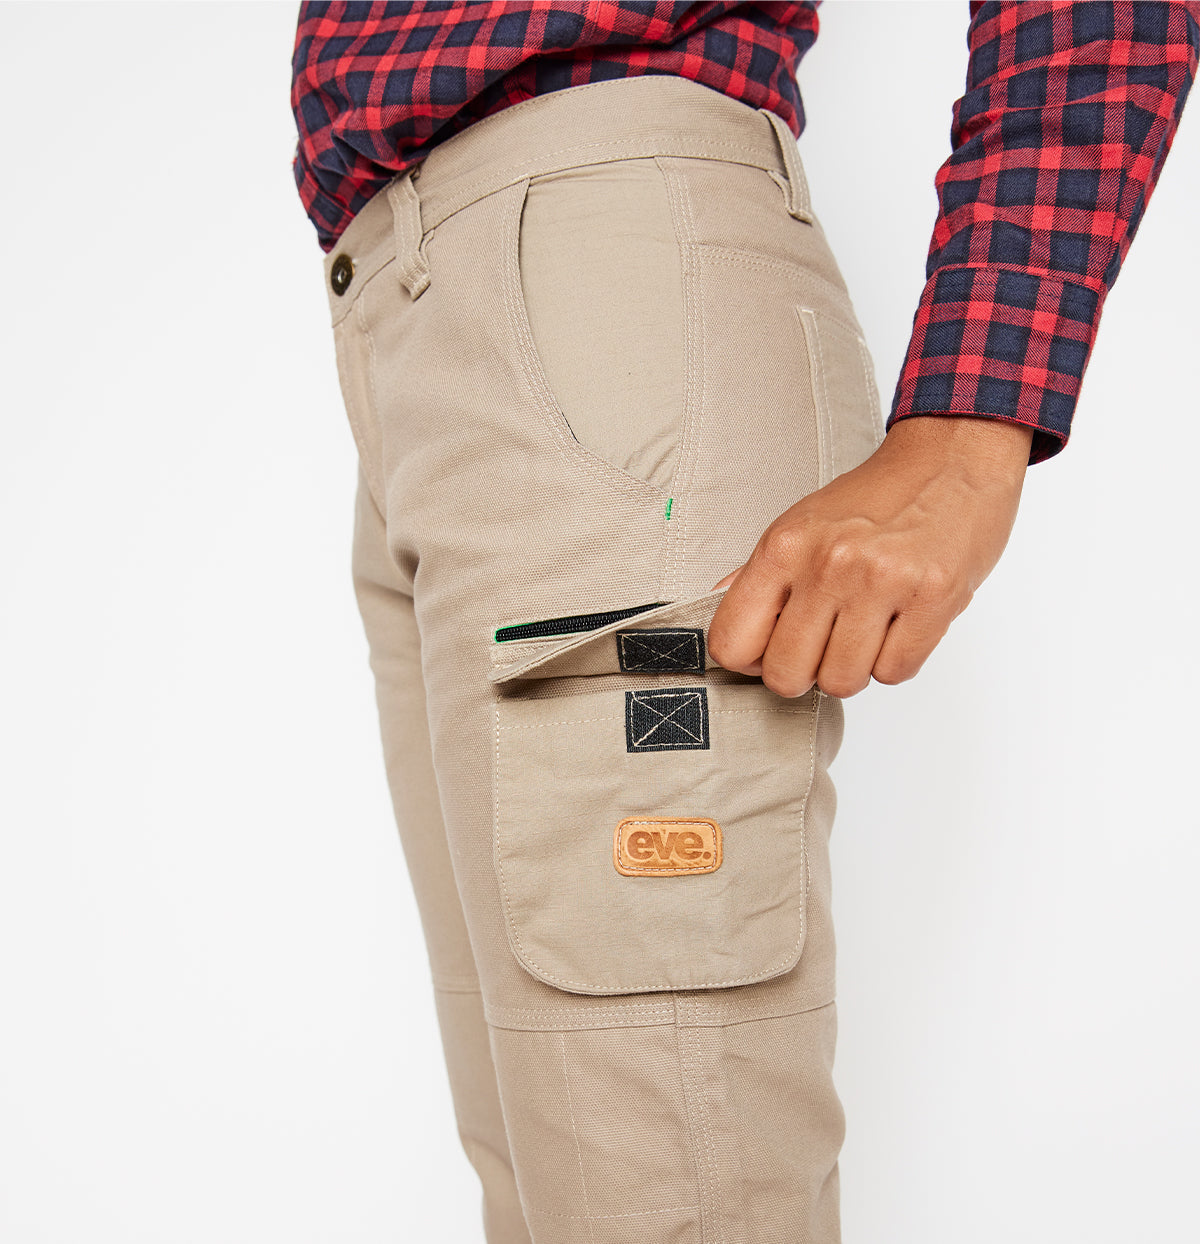 Mid Rise Heavy Duty Pants - Strong